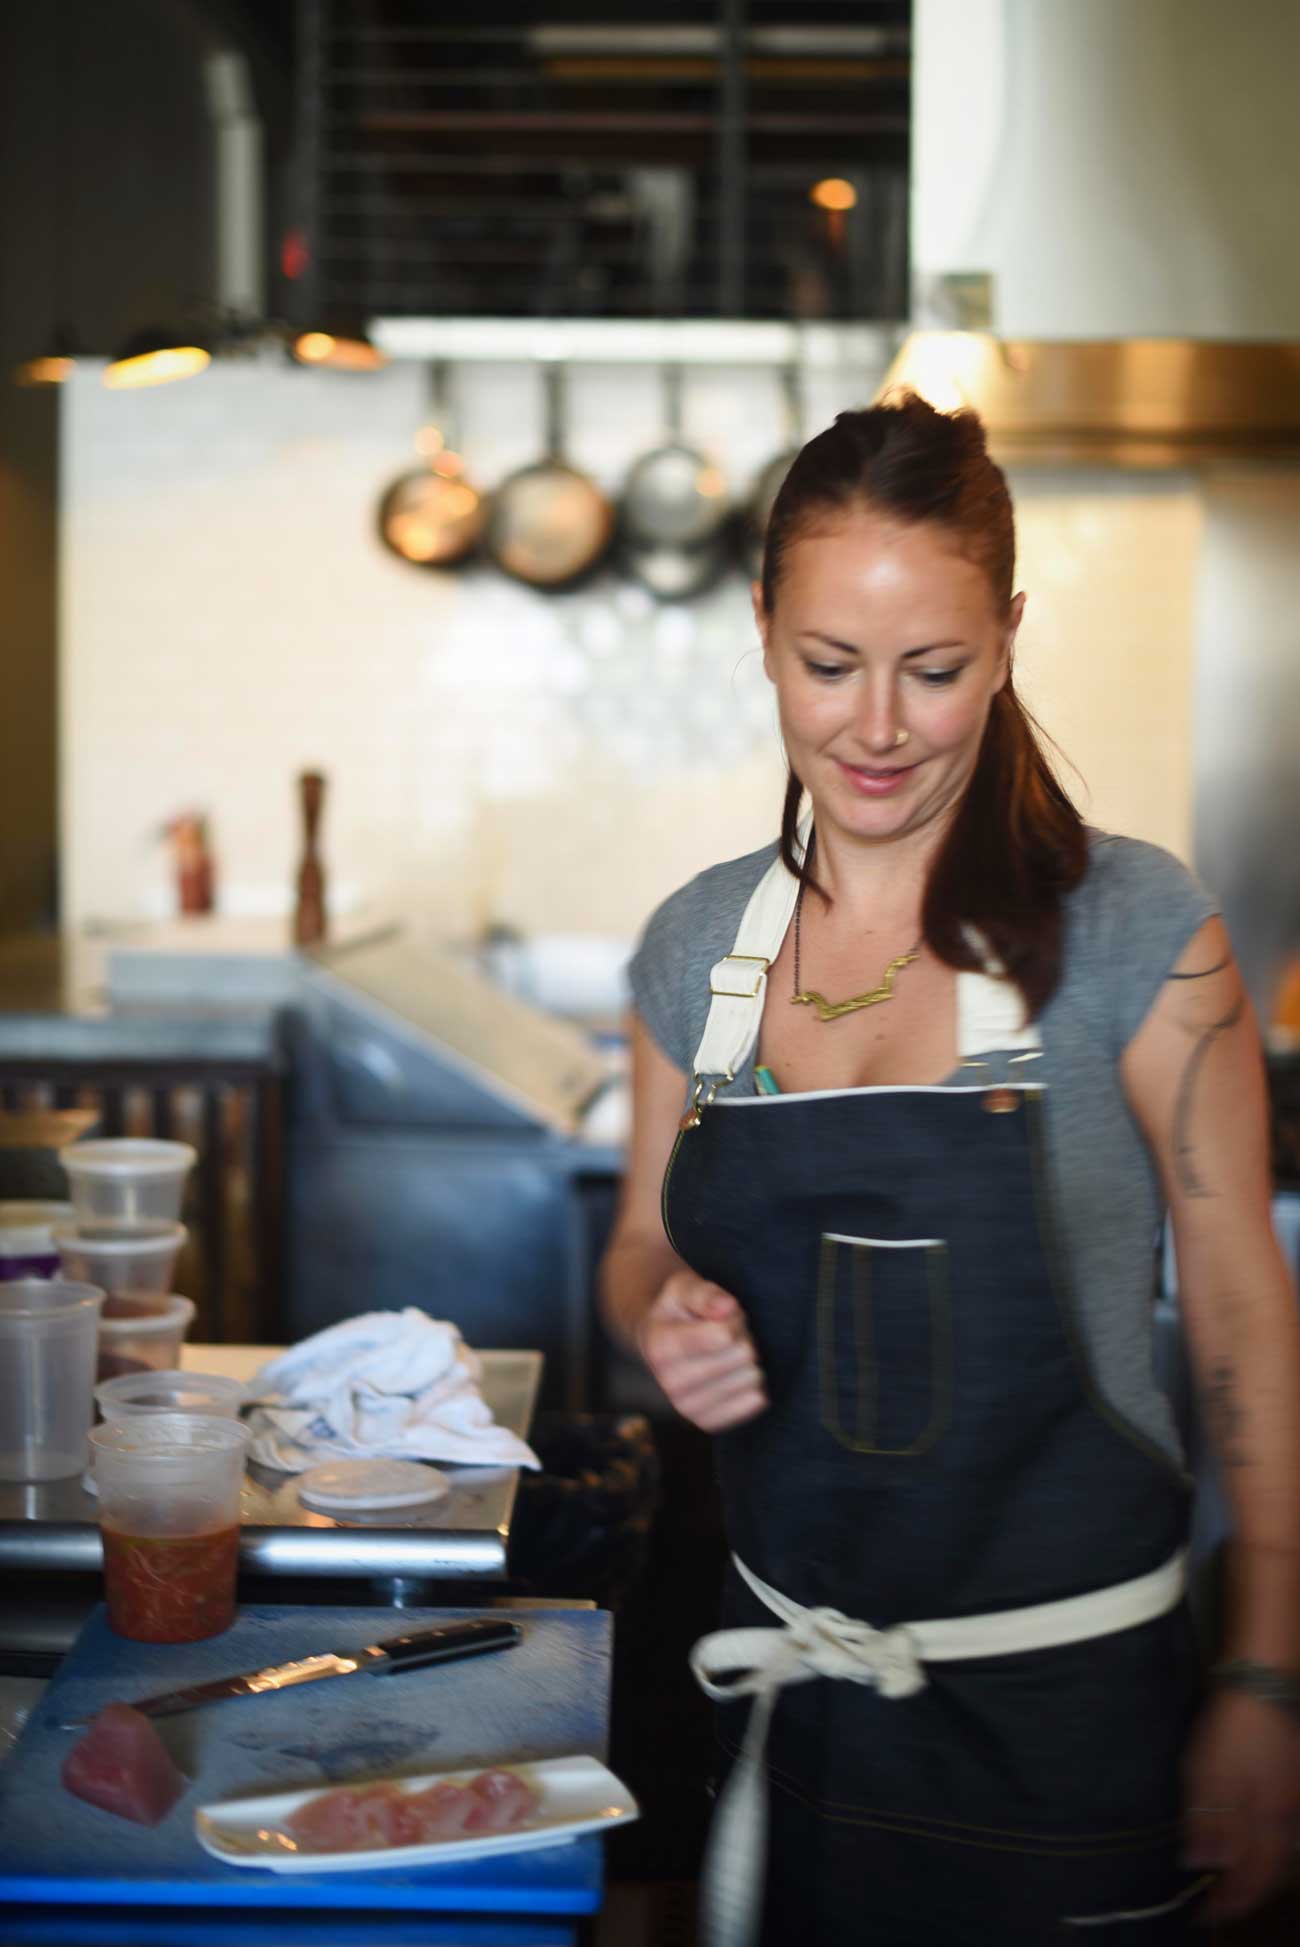 Chef Melissa prepares most of the dishes herself, given the small kitchen size at Bar Crudo.